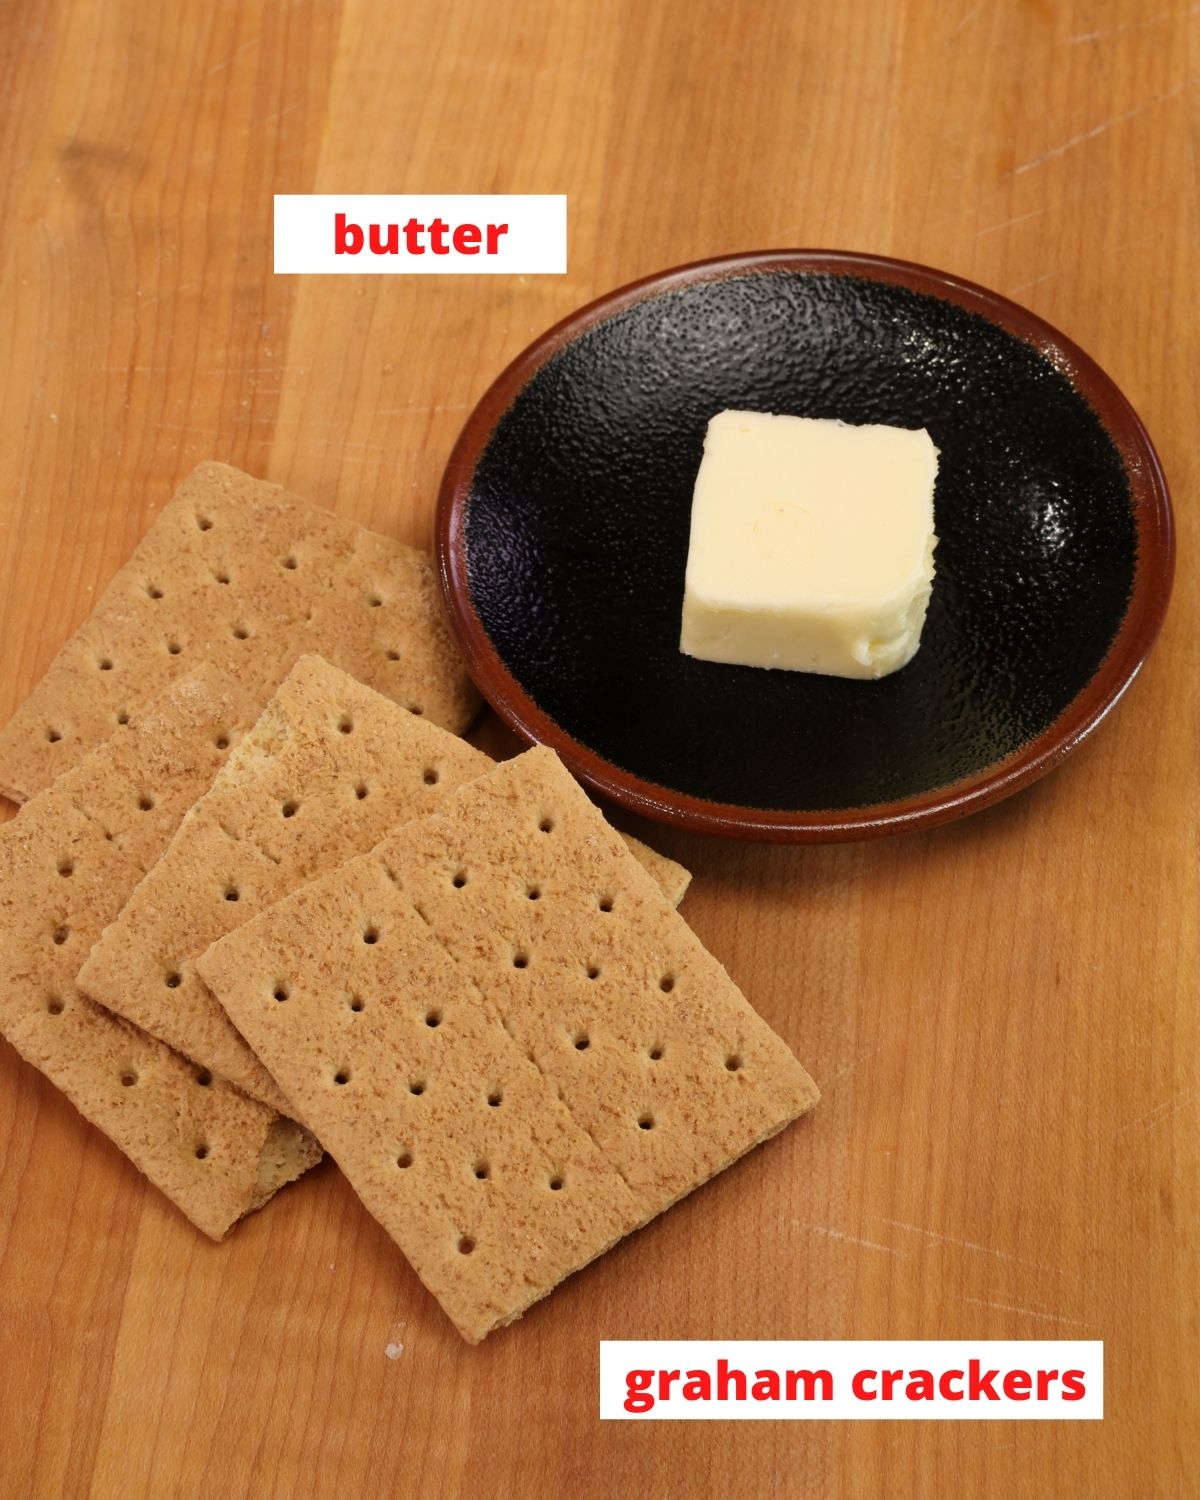 graham crackers and a tablespoon of butter on a wooden cutting board.